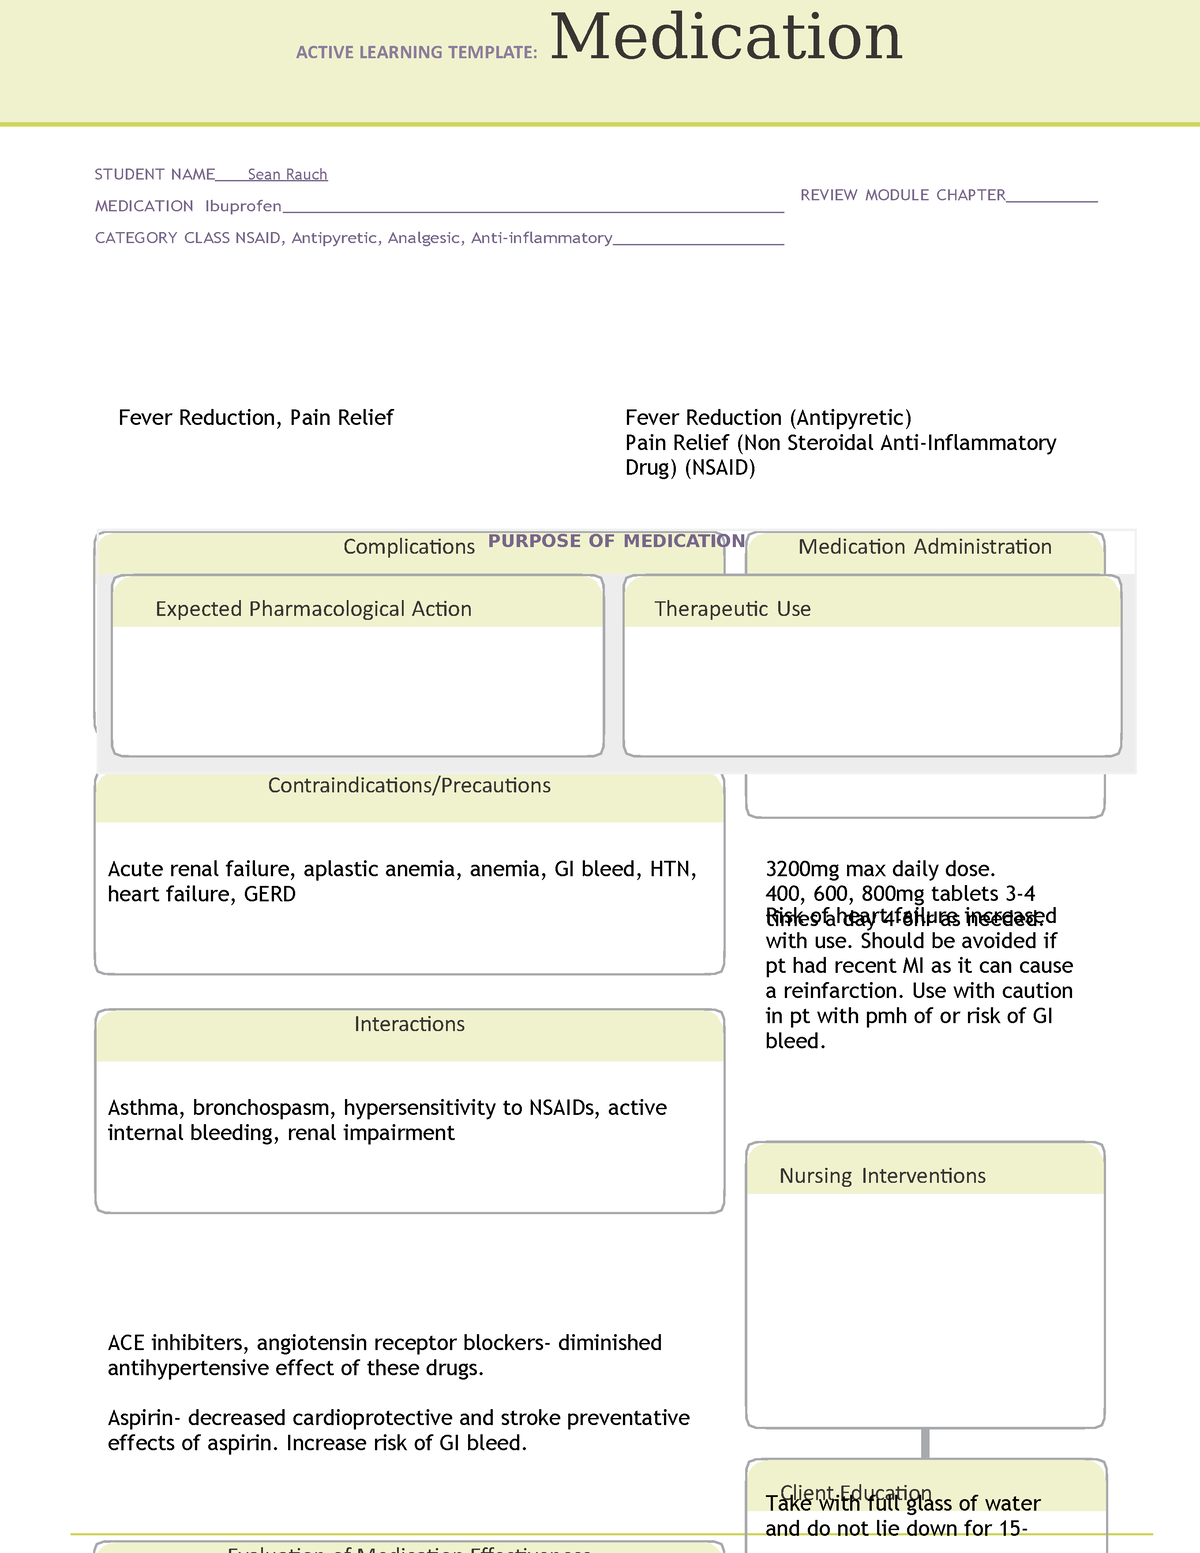 Ibuprofen done Medication Template ACTIVE LEARNING TEMPLATE